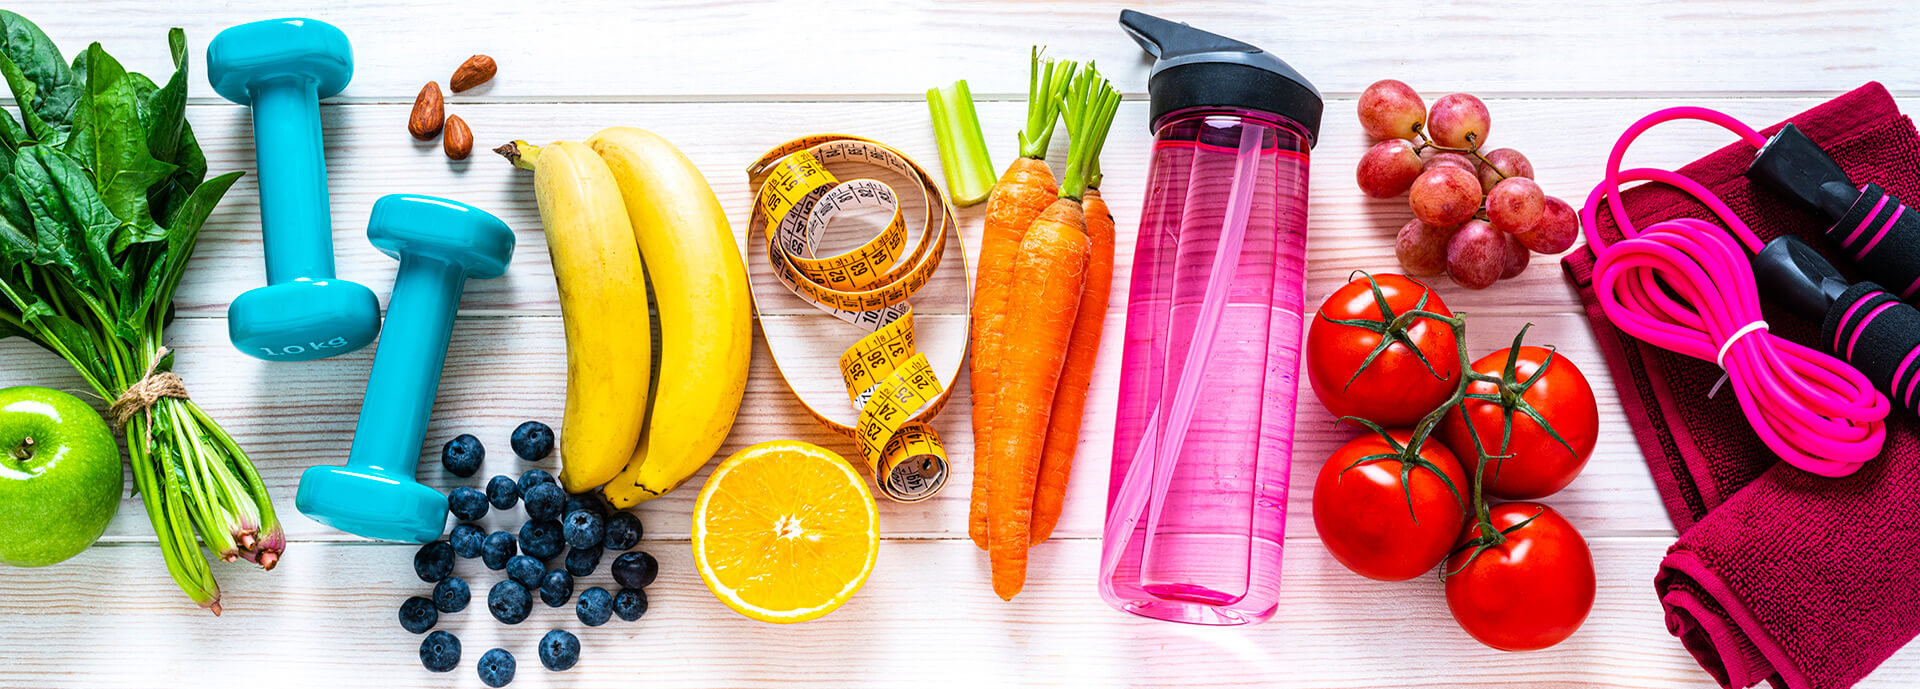 Exercising and healthy eating concept: overhead view of rainbow colored dumbbells, jump rope, water bottle, towel, tape measure and healthy fresh organic vegetables and fruits